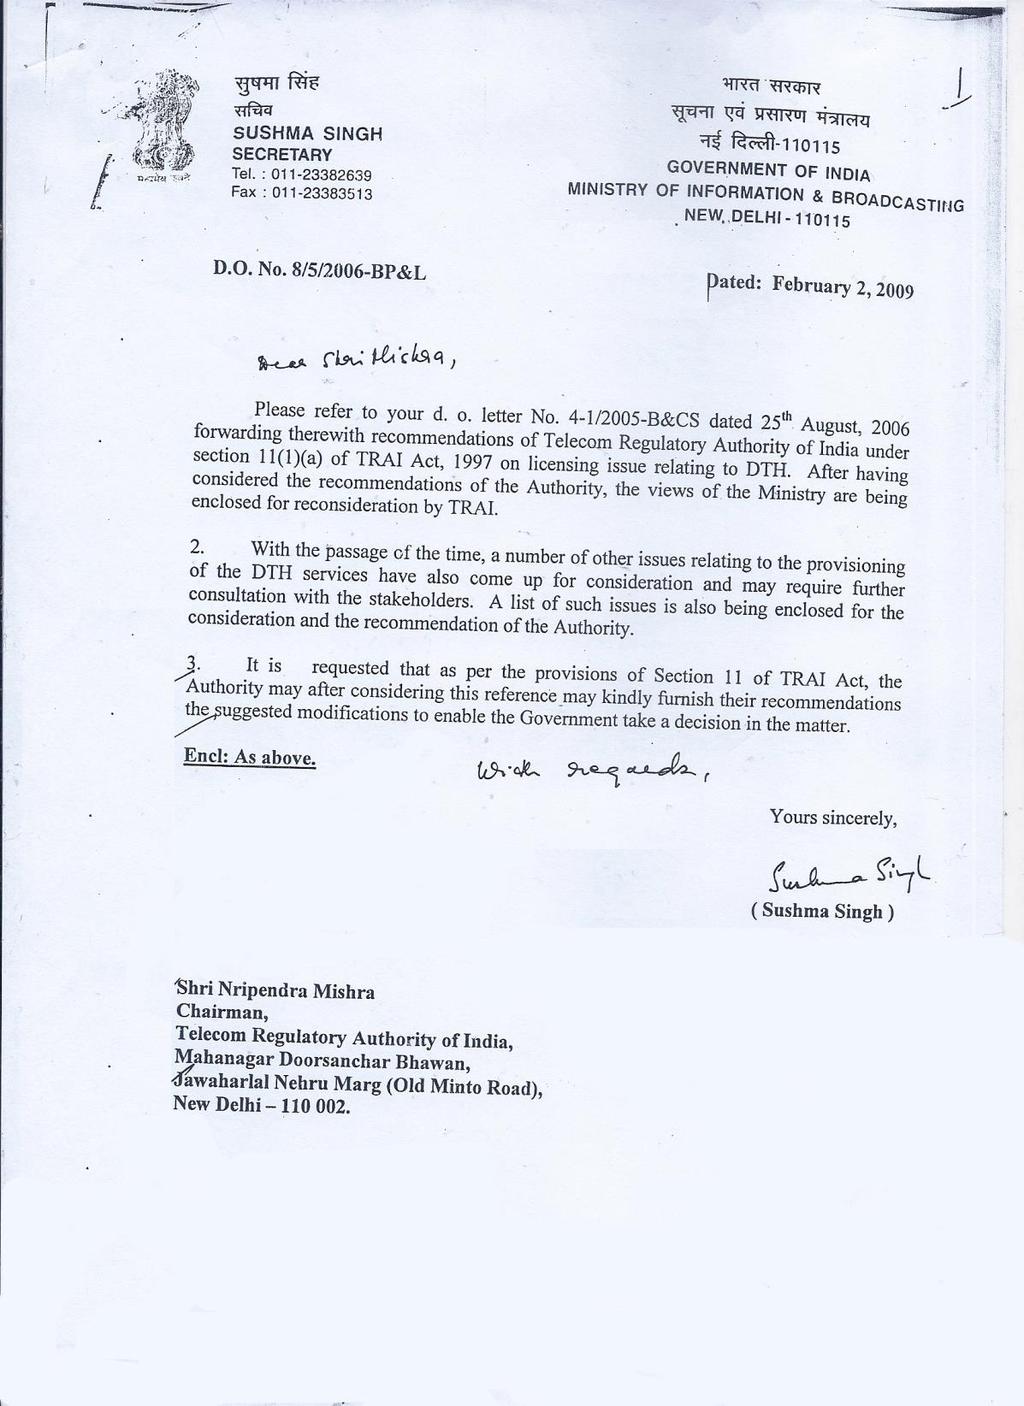 MIB letter dated 02